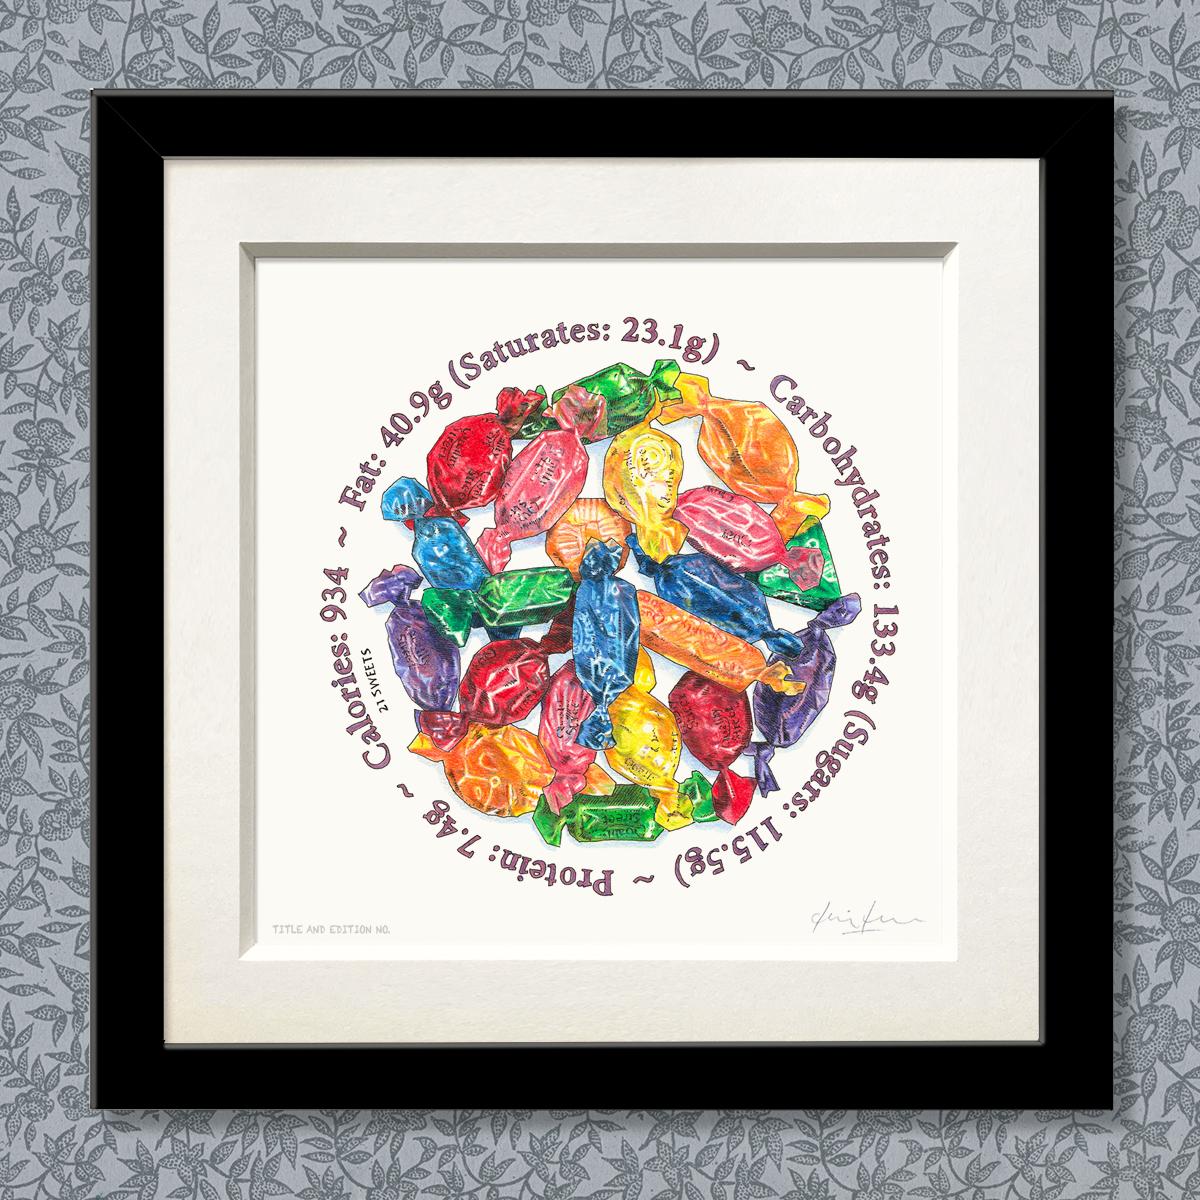 Limited edition print of coloured drawing of a pile of Quality Street chocolates, in a black frame.